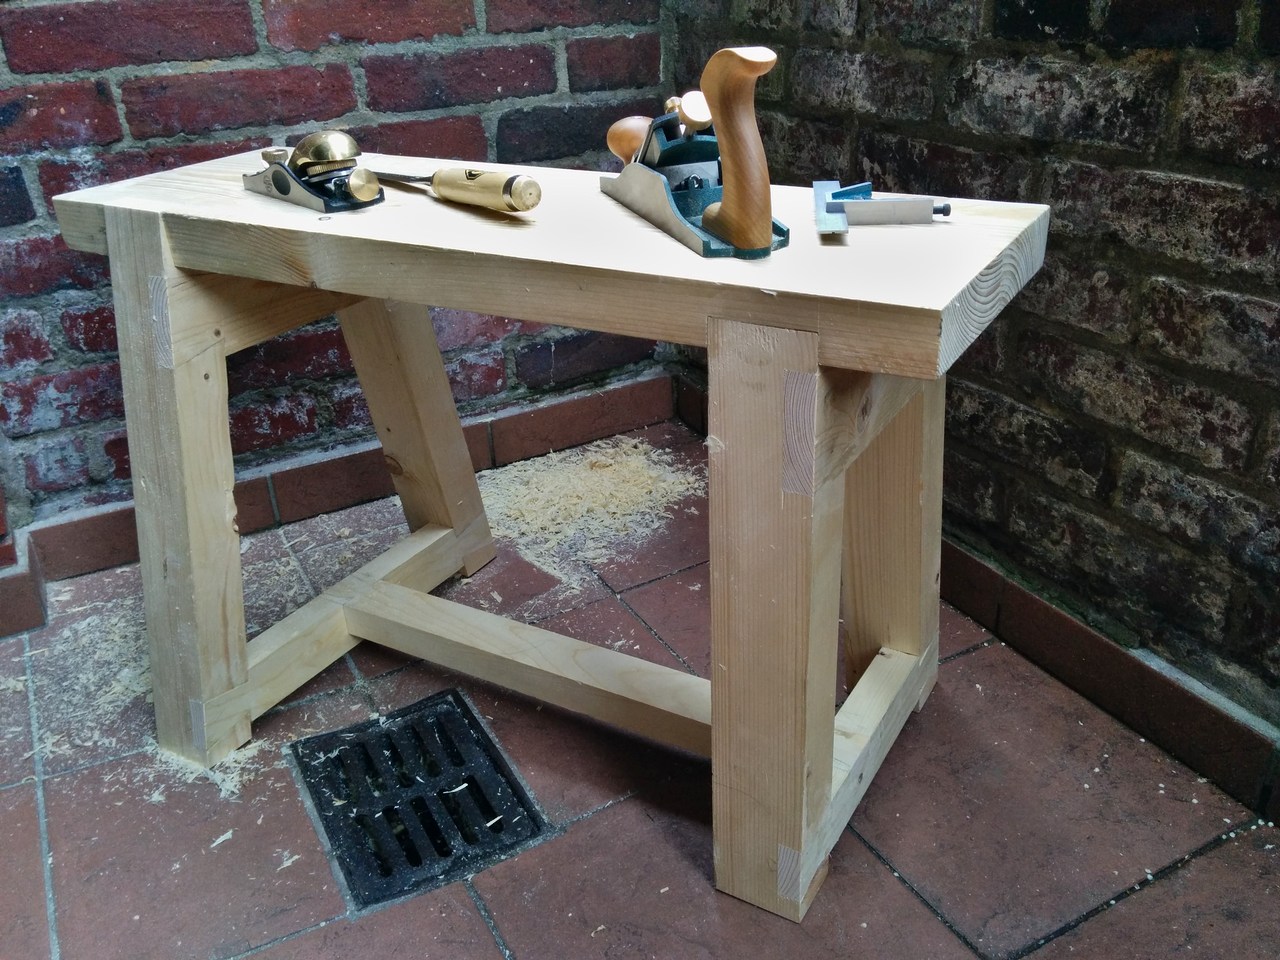 Sawbench MkII with less mistakes